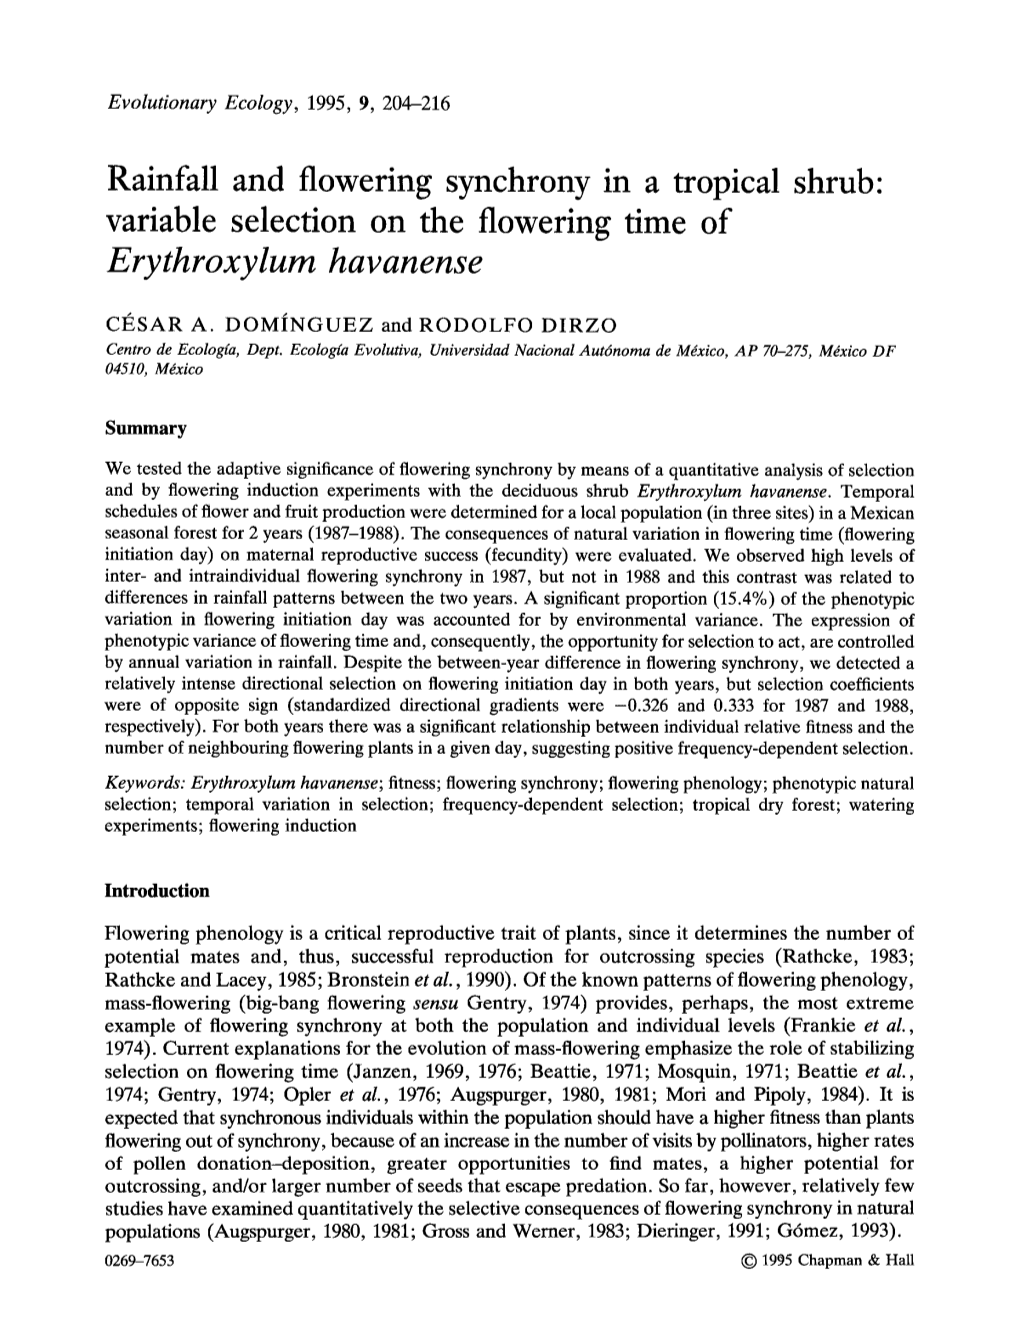 Rainfall and Flowering Synchrony in a Tropical Shrub: Variable Selection on the Flowering Time of Erythroxylum Havanense